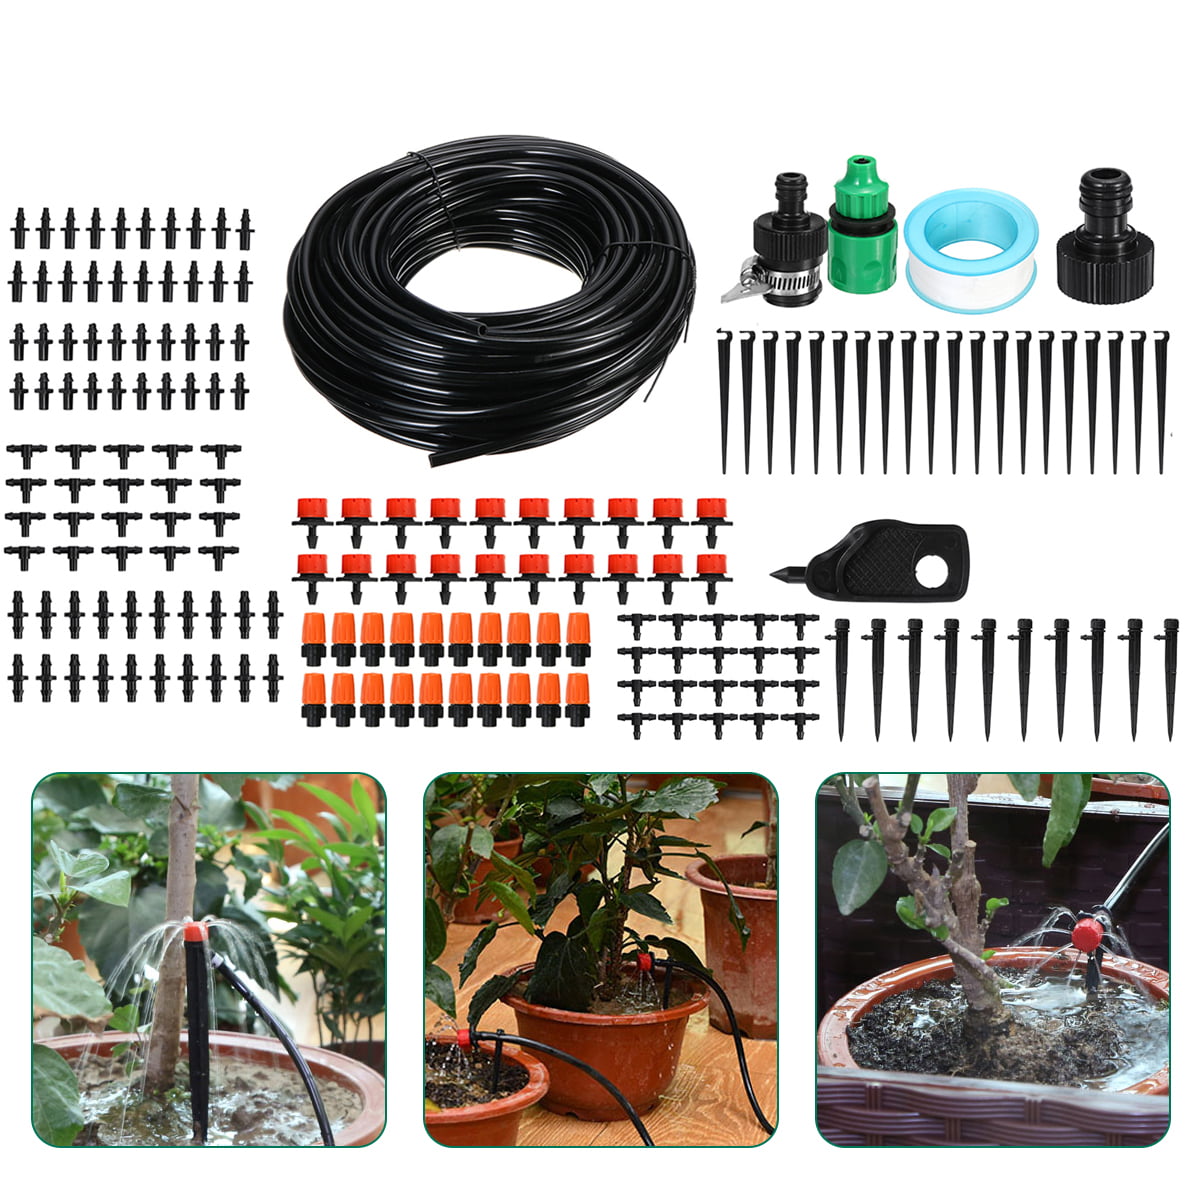 annotebestus DIY Drip Irrigation System Kit with Connector Lawn 1/4 15M Hose Outdoor Patio Adjustable Sprinkler Dripper Greenhouse Micro Drip Automatic Watering for Pot